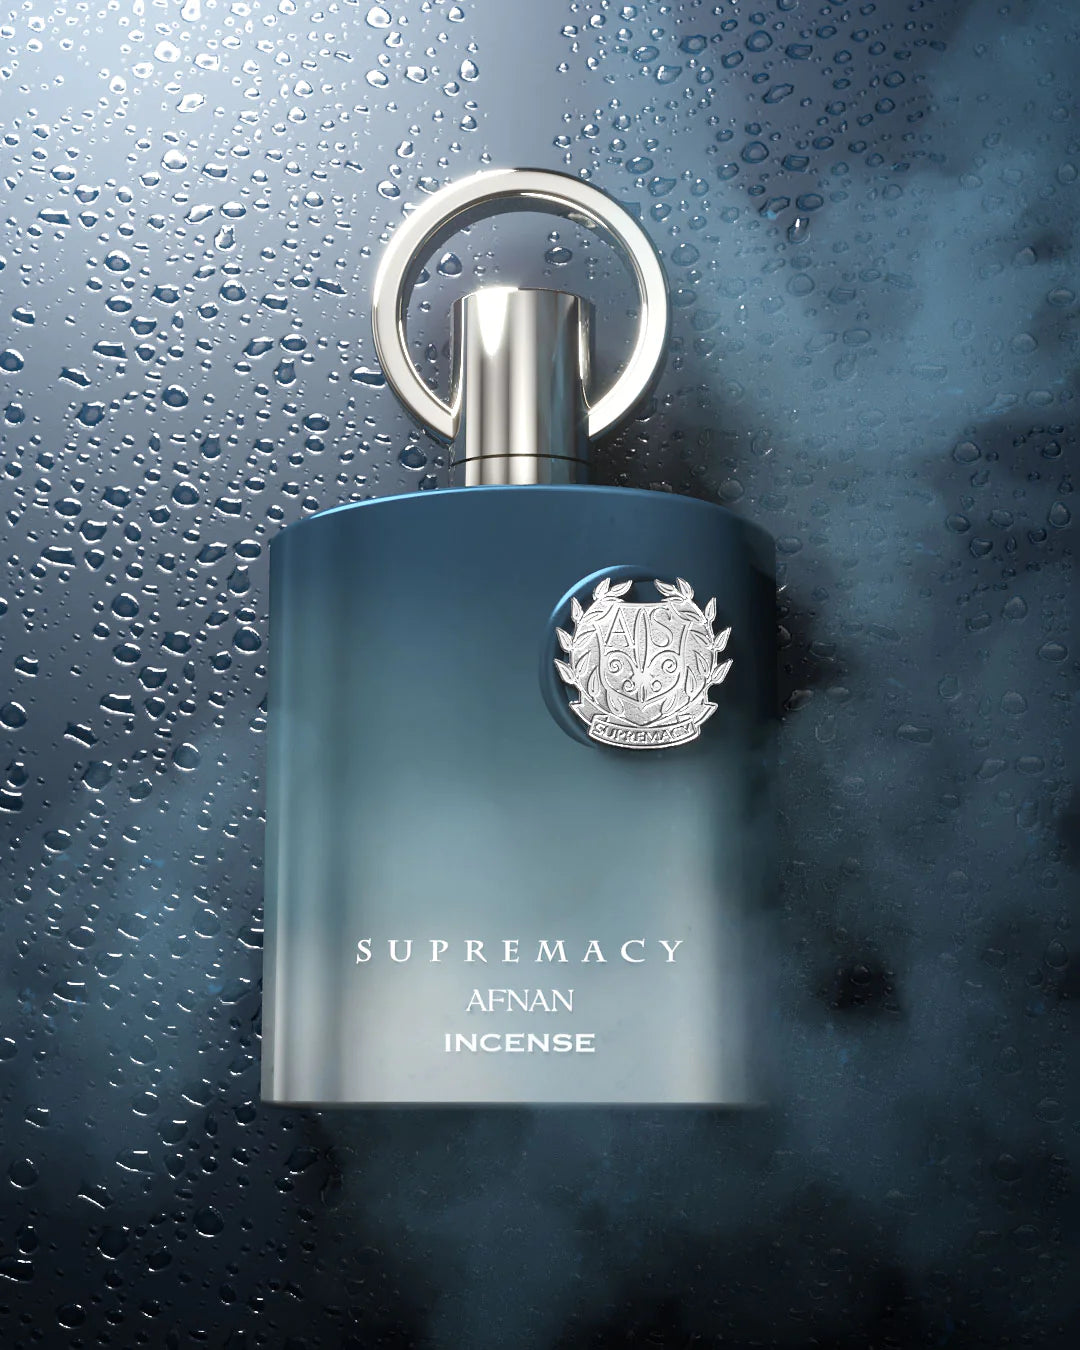 The image displays a luxurious perfume bottle set against a dark, moody background with water droplets, suggesting a fresh or aquatic theme. The bottle has a gradient of navy blue at the bottom, fading into a clear glass towards the top. It is adorned with a silver emblem featuring intricate designs.  The overall image conveys a sense of high-end sophistication and the essence of the fragrance within.